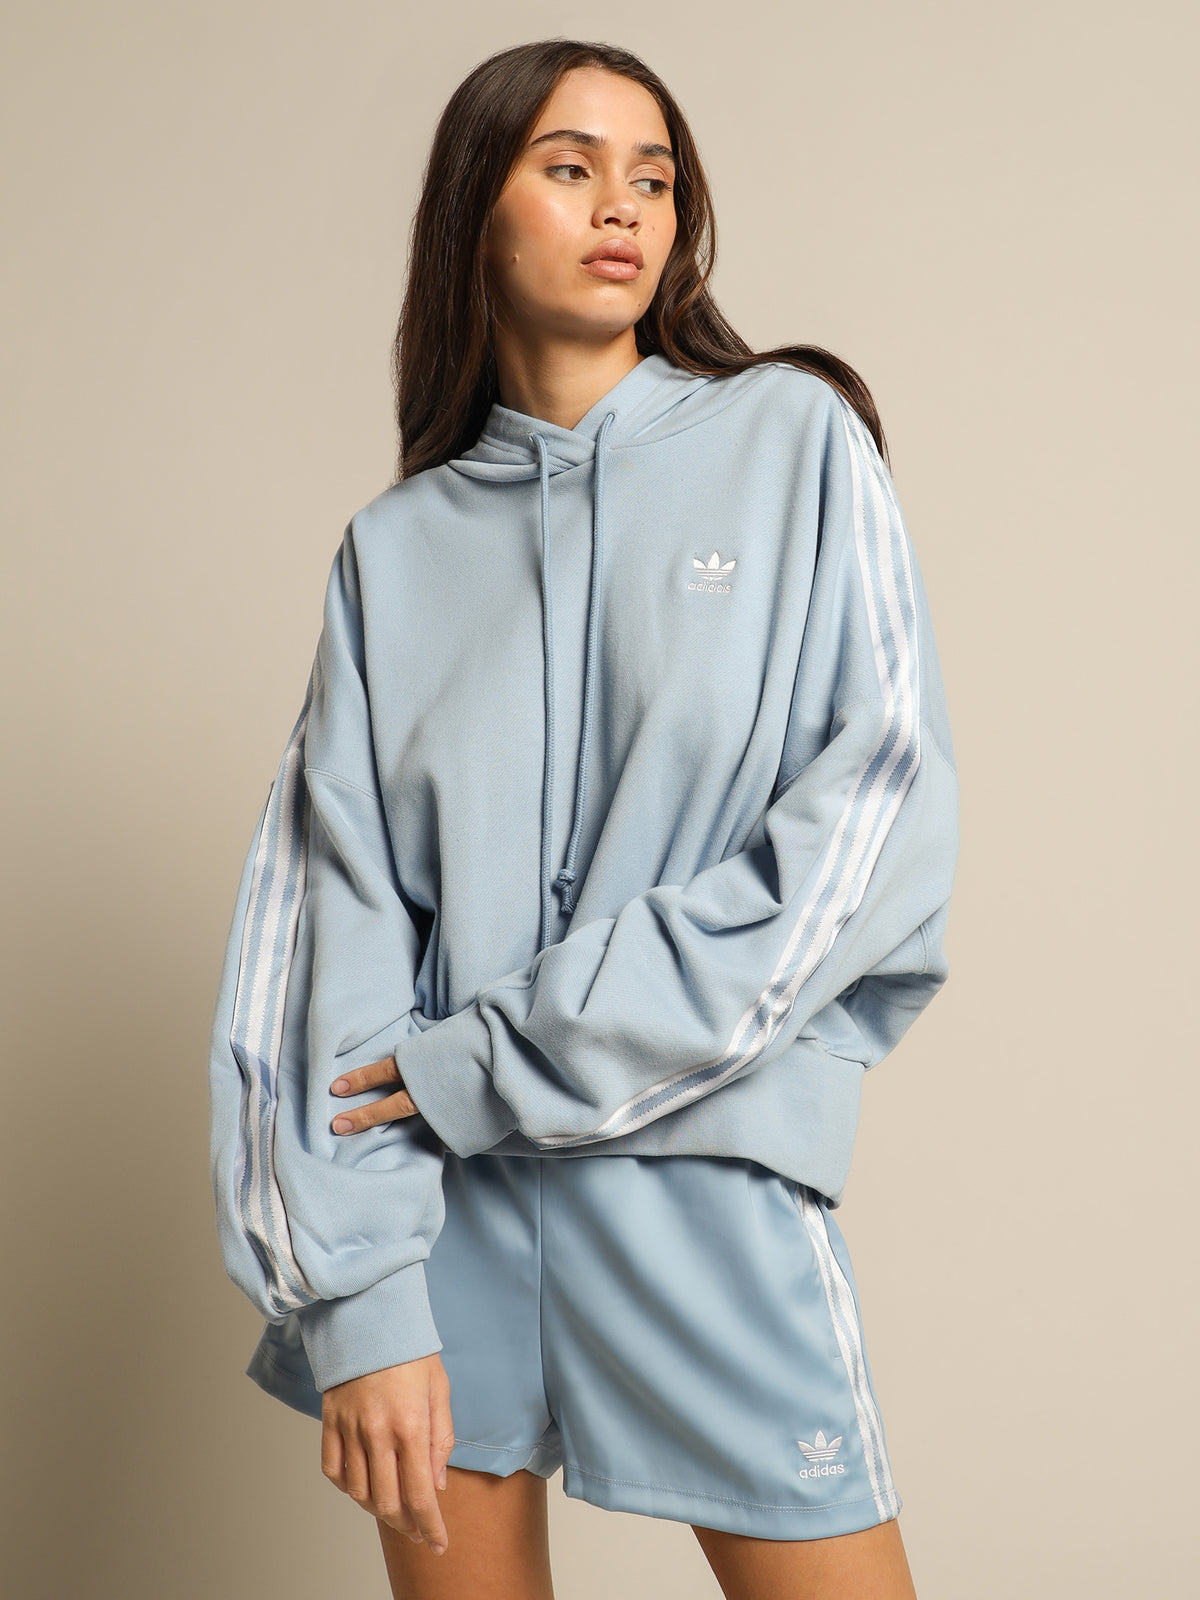 Satin Tape Cropped Hoodie in Ambient Sky